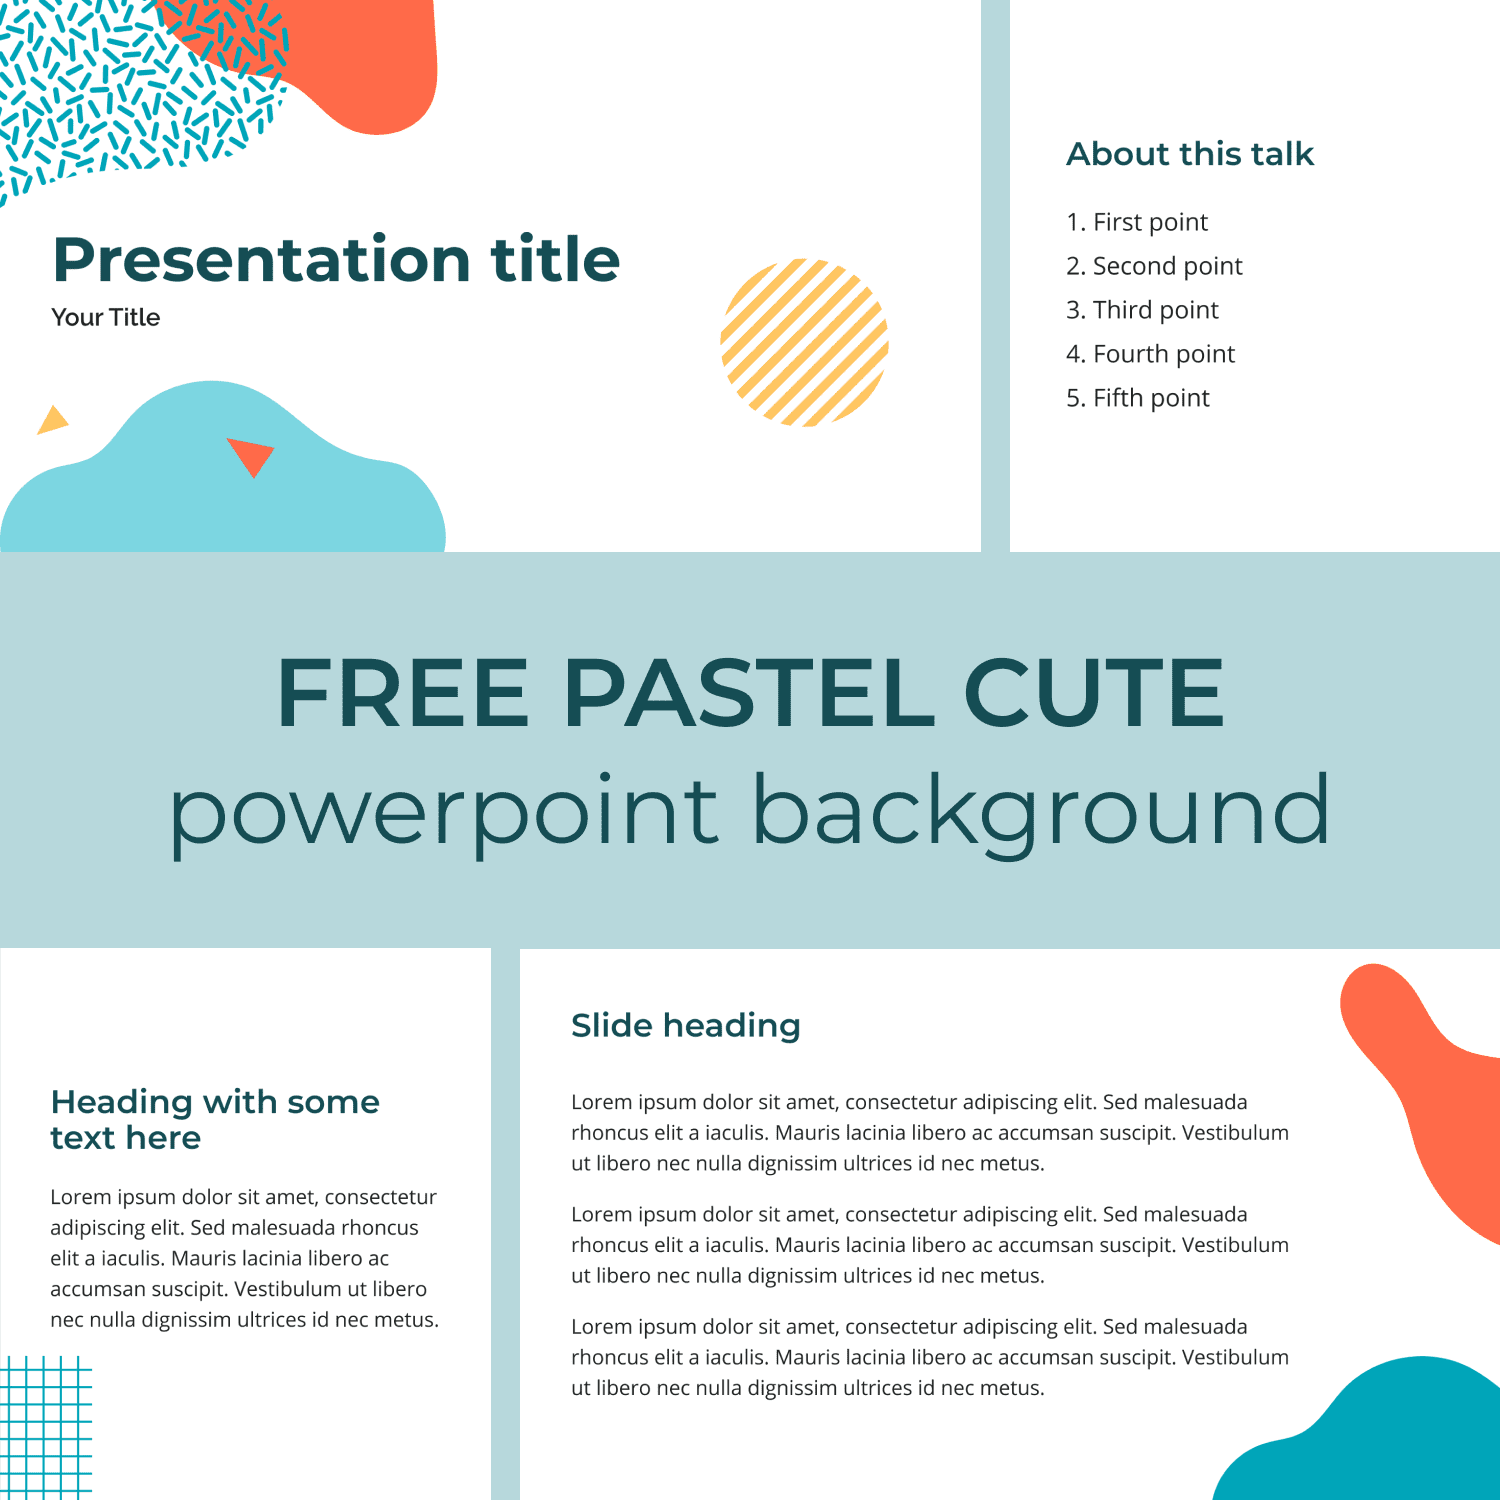 Preview Free Pastel Cute Powerpoint background 1500x1500 1.